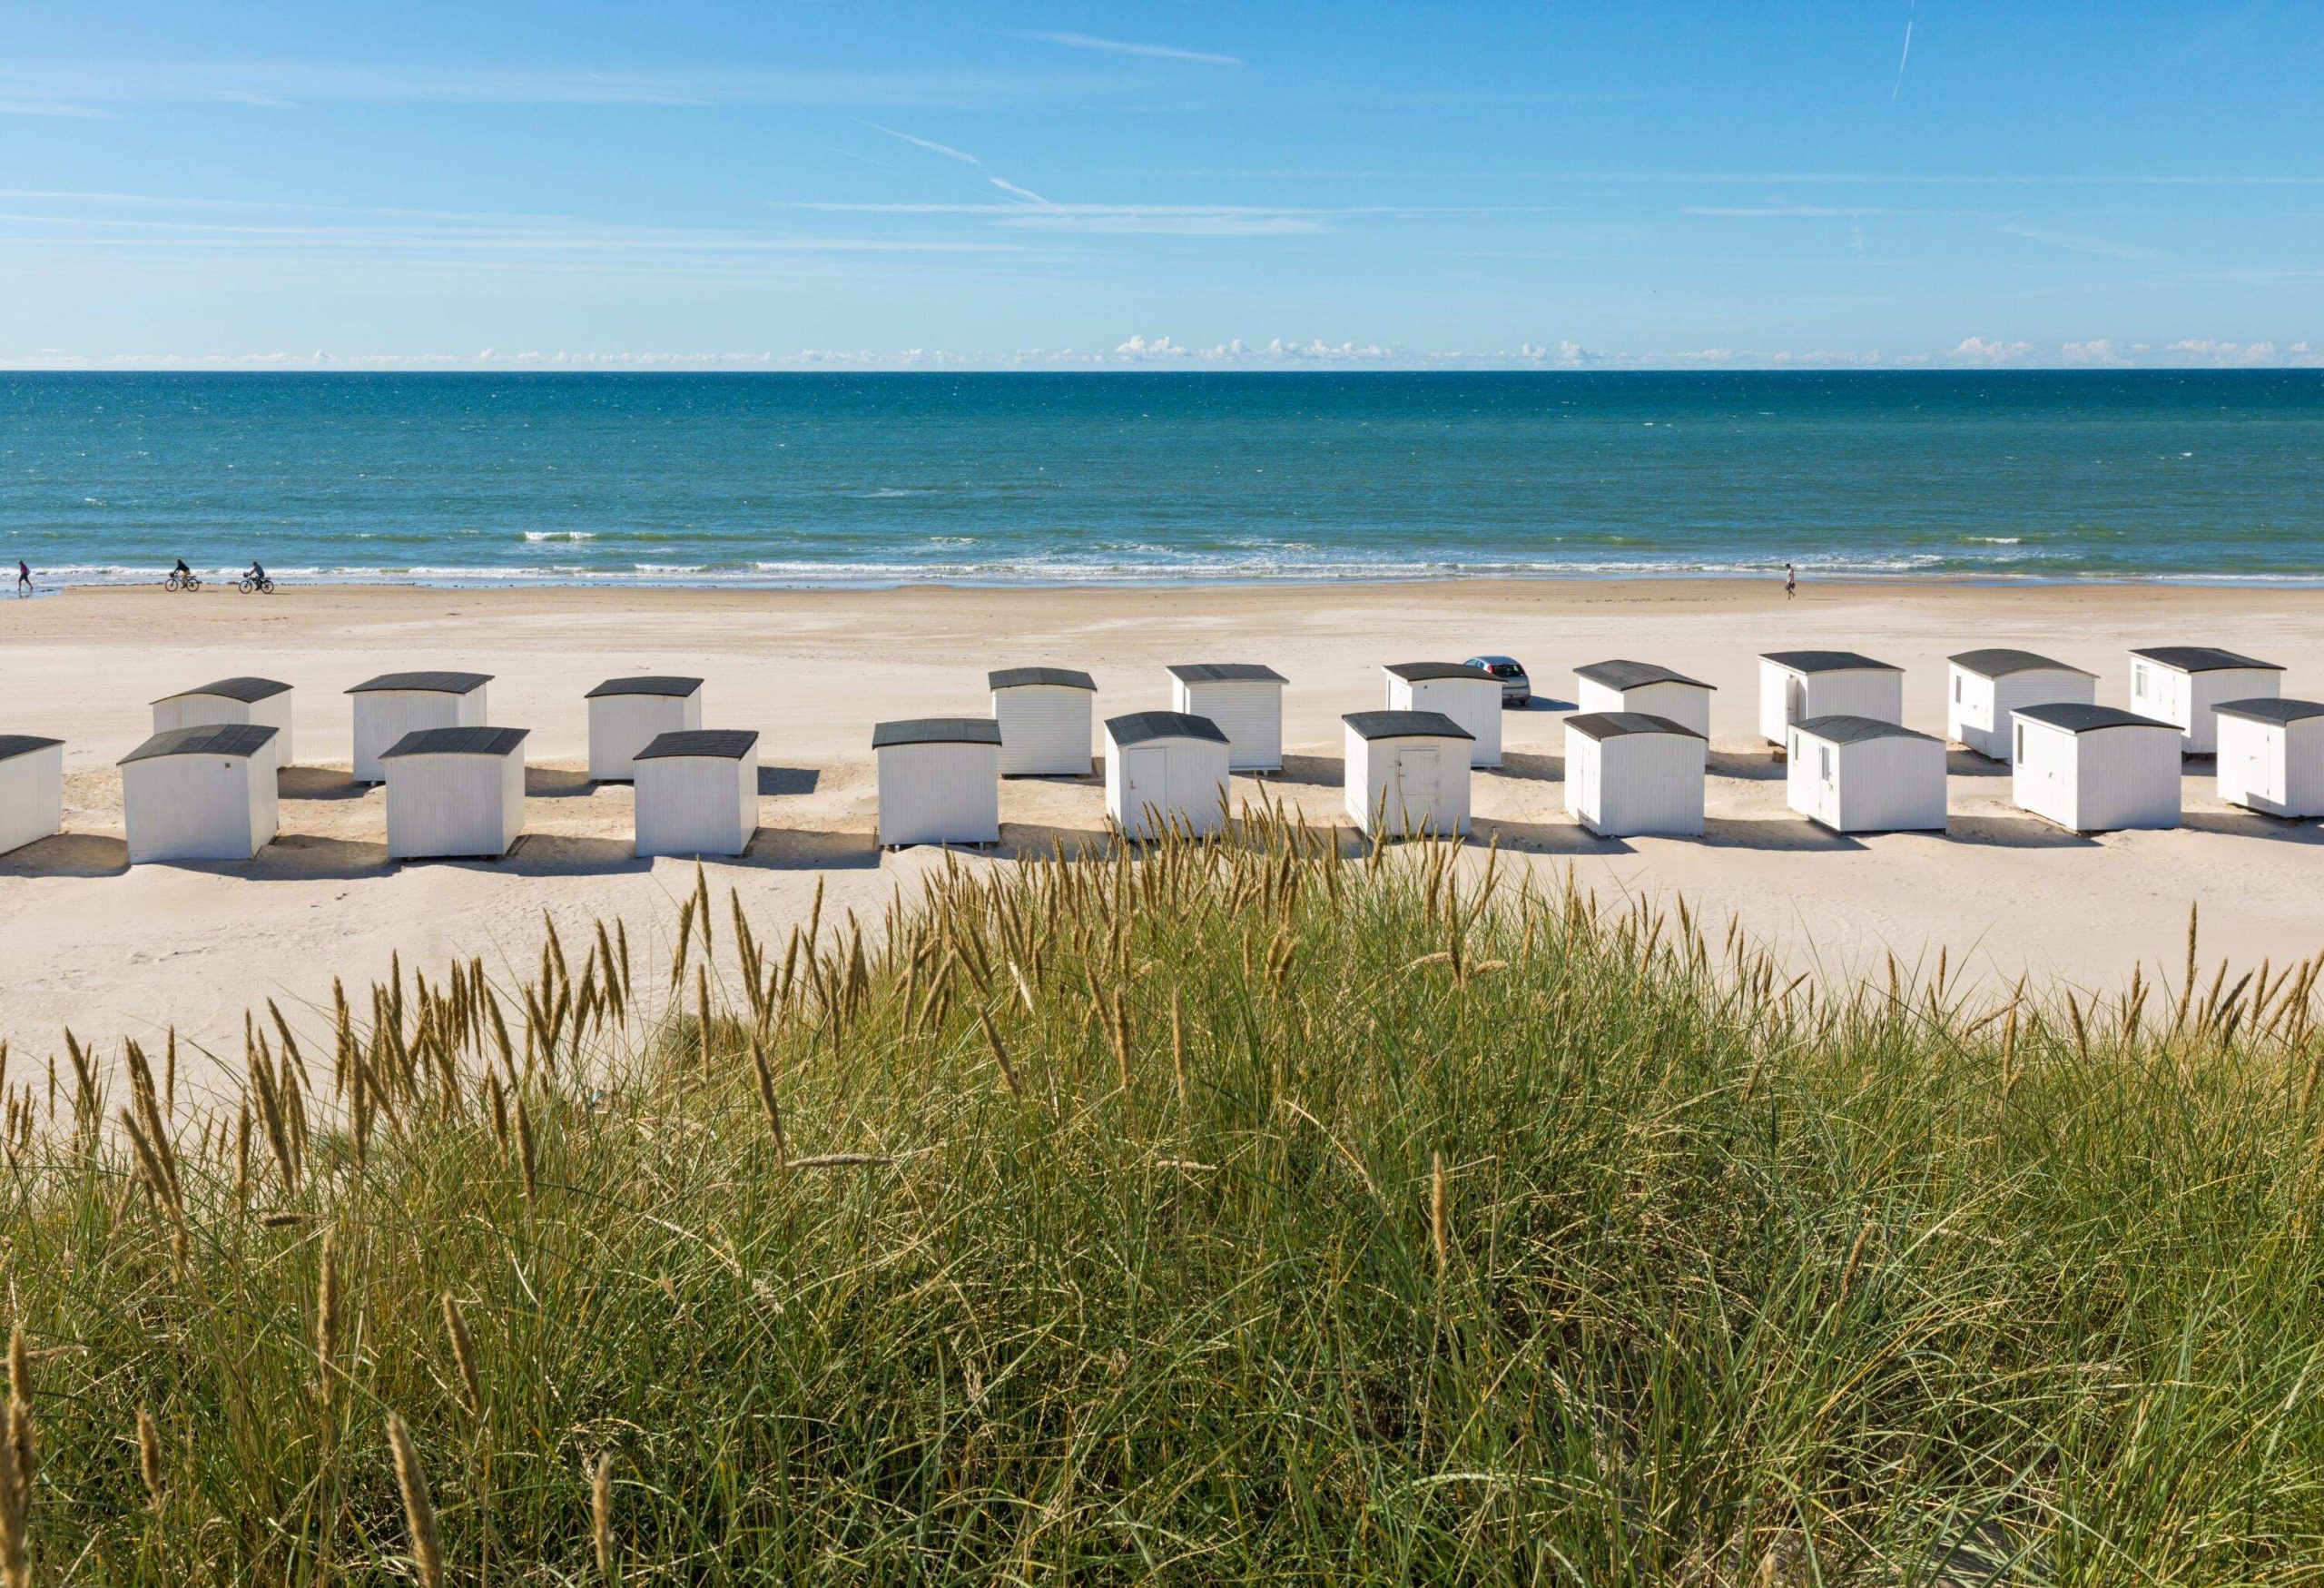 The beach of Løkken, Denmark, with it's rows of white wooden beach huts